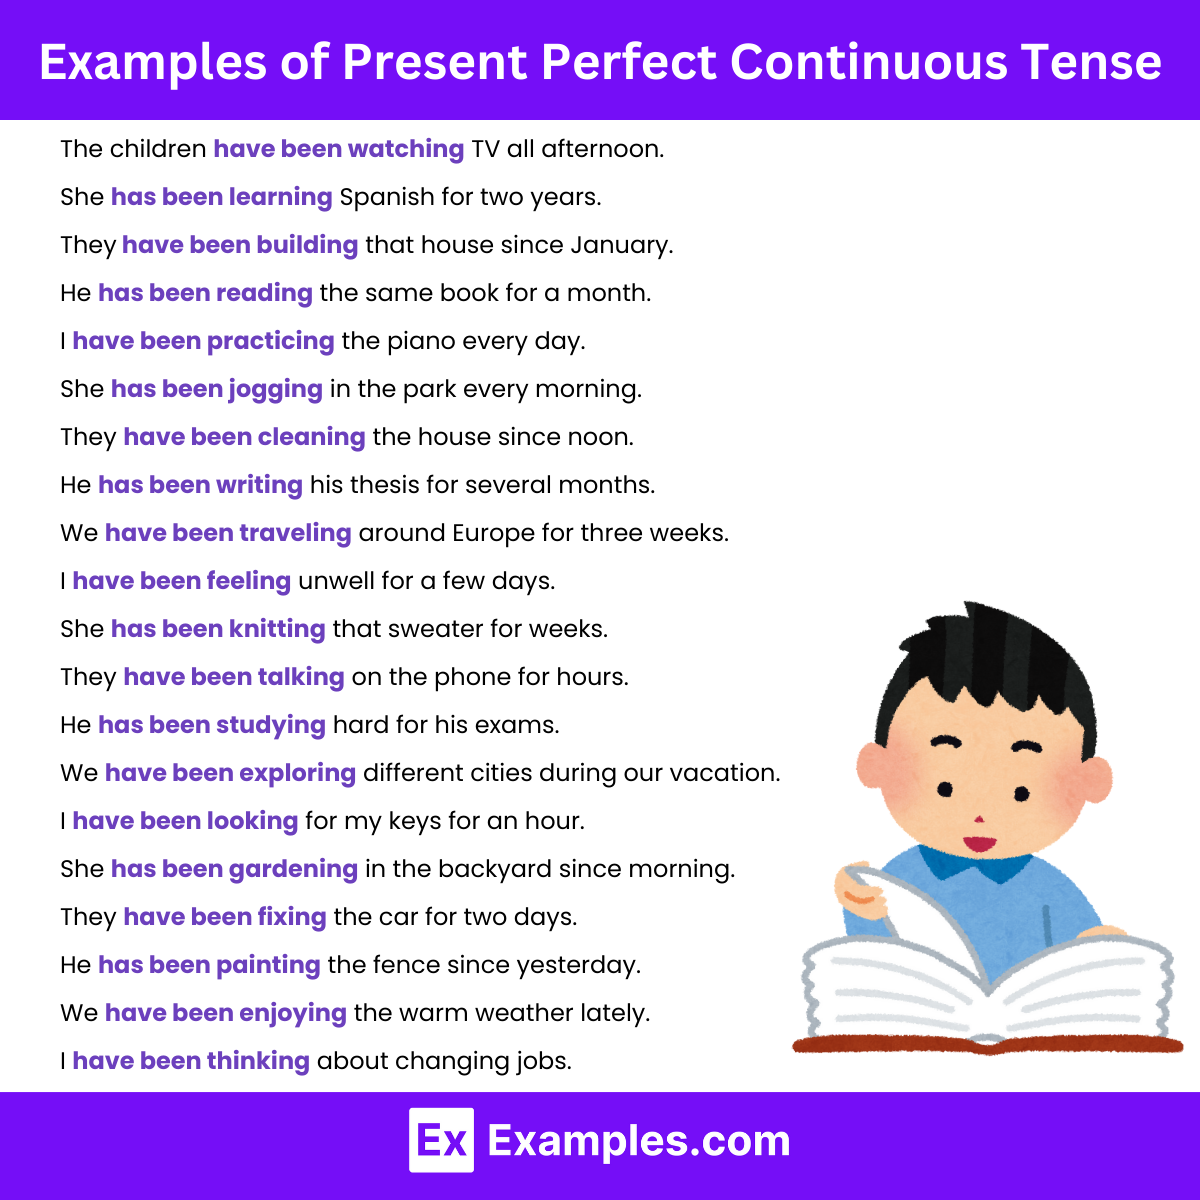 Examples of Present Perfect Continuous Tense